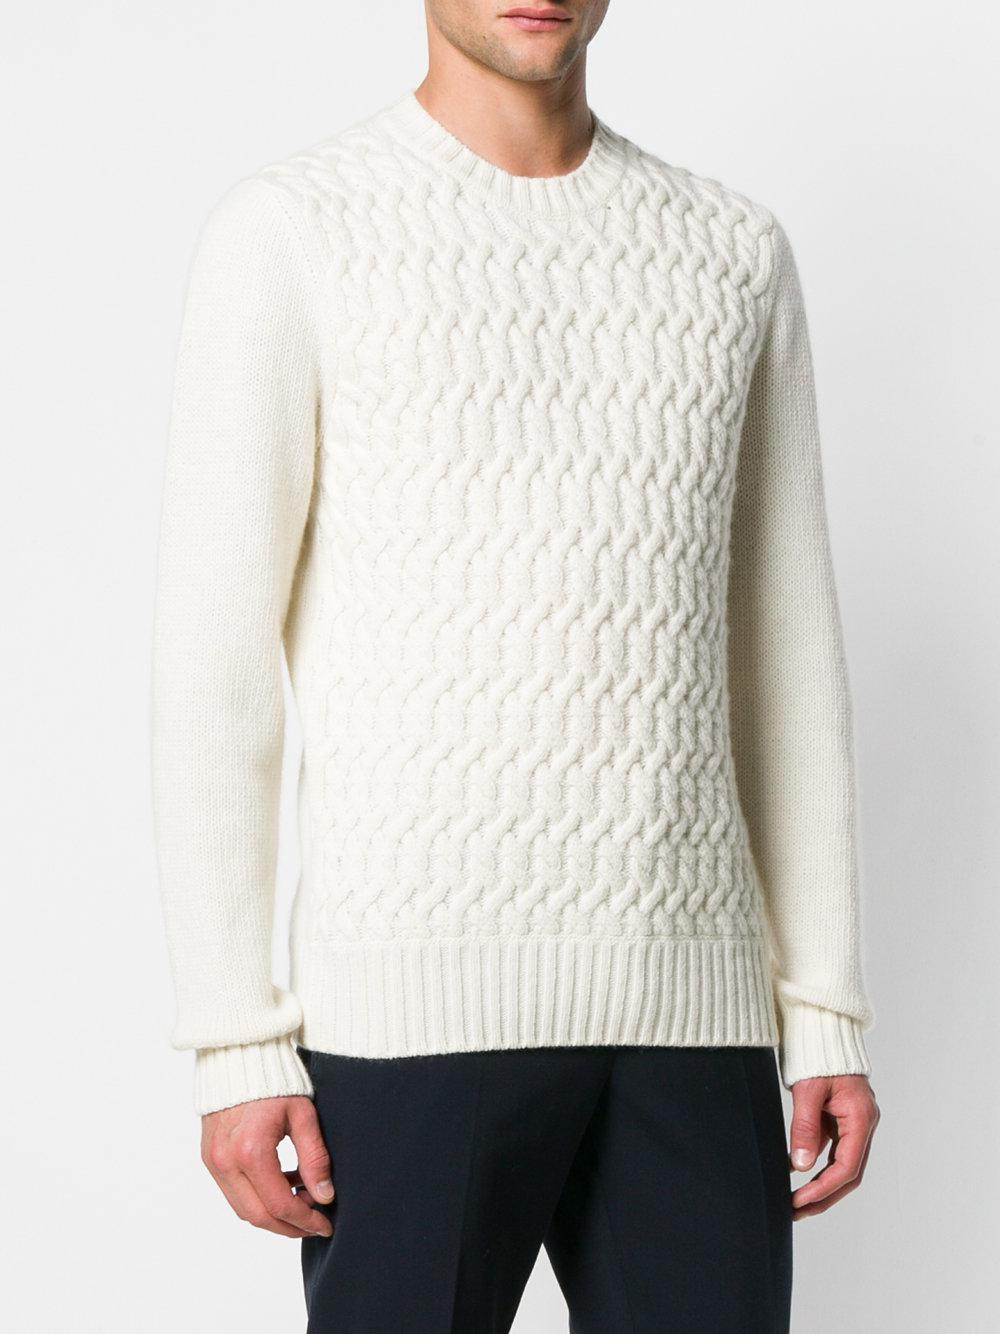 Eleventy Wool Cable Knit Jumper in White for Men - Lyst